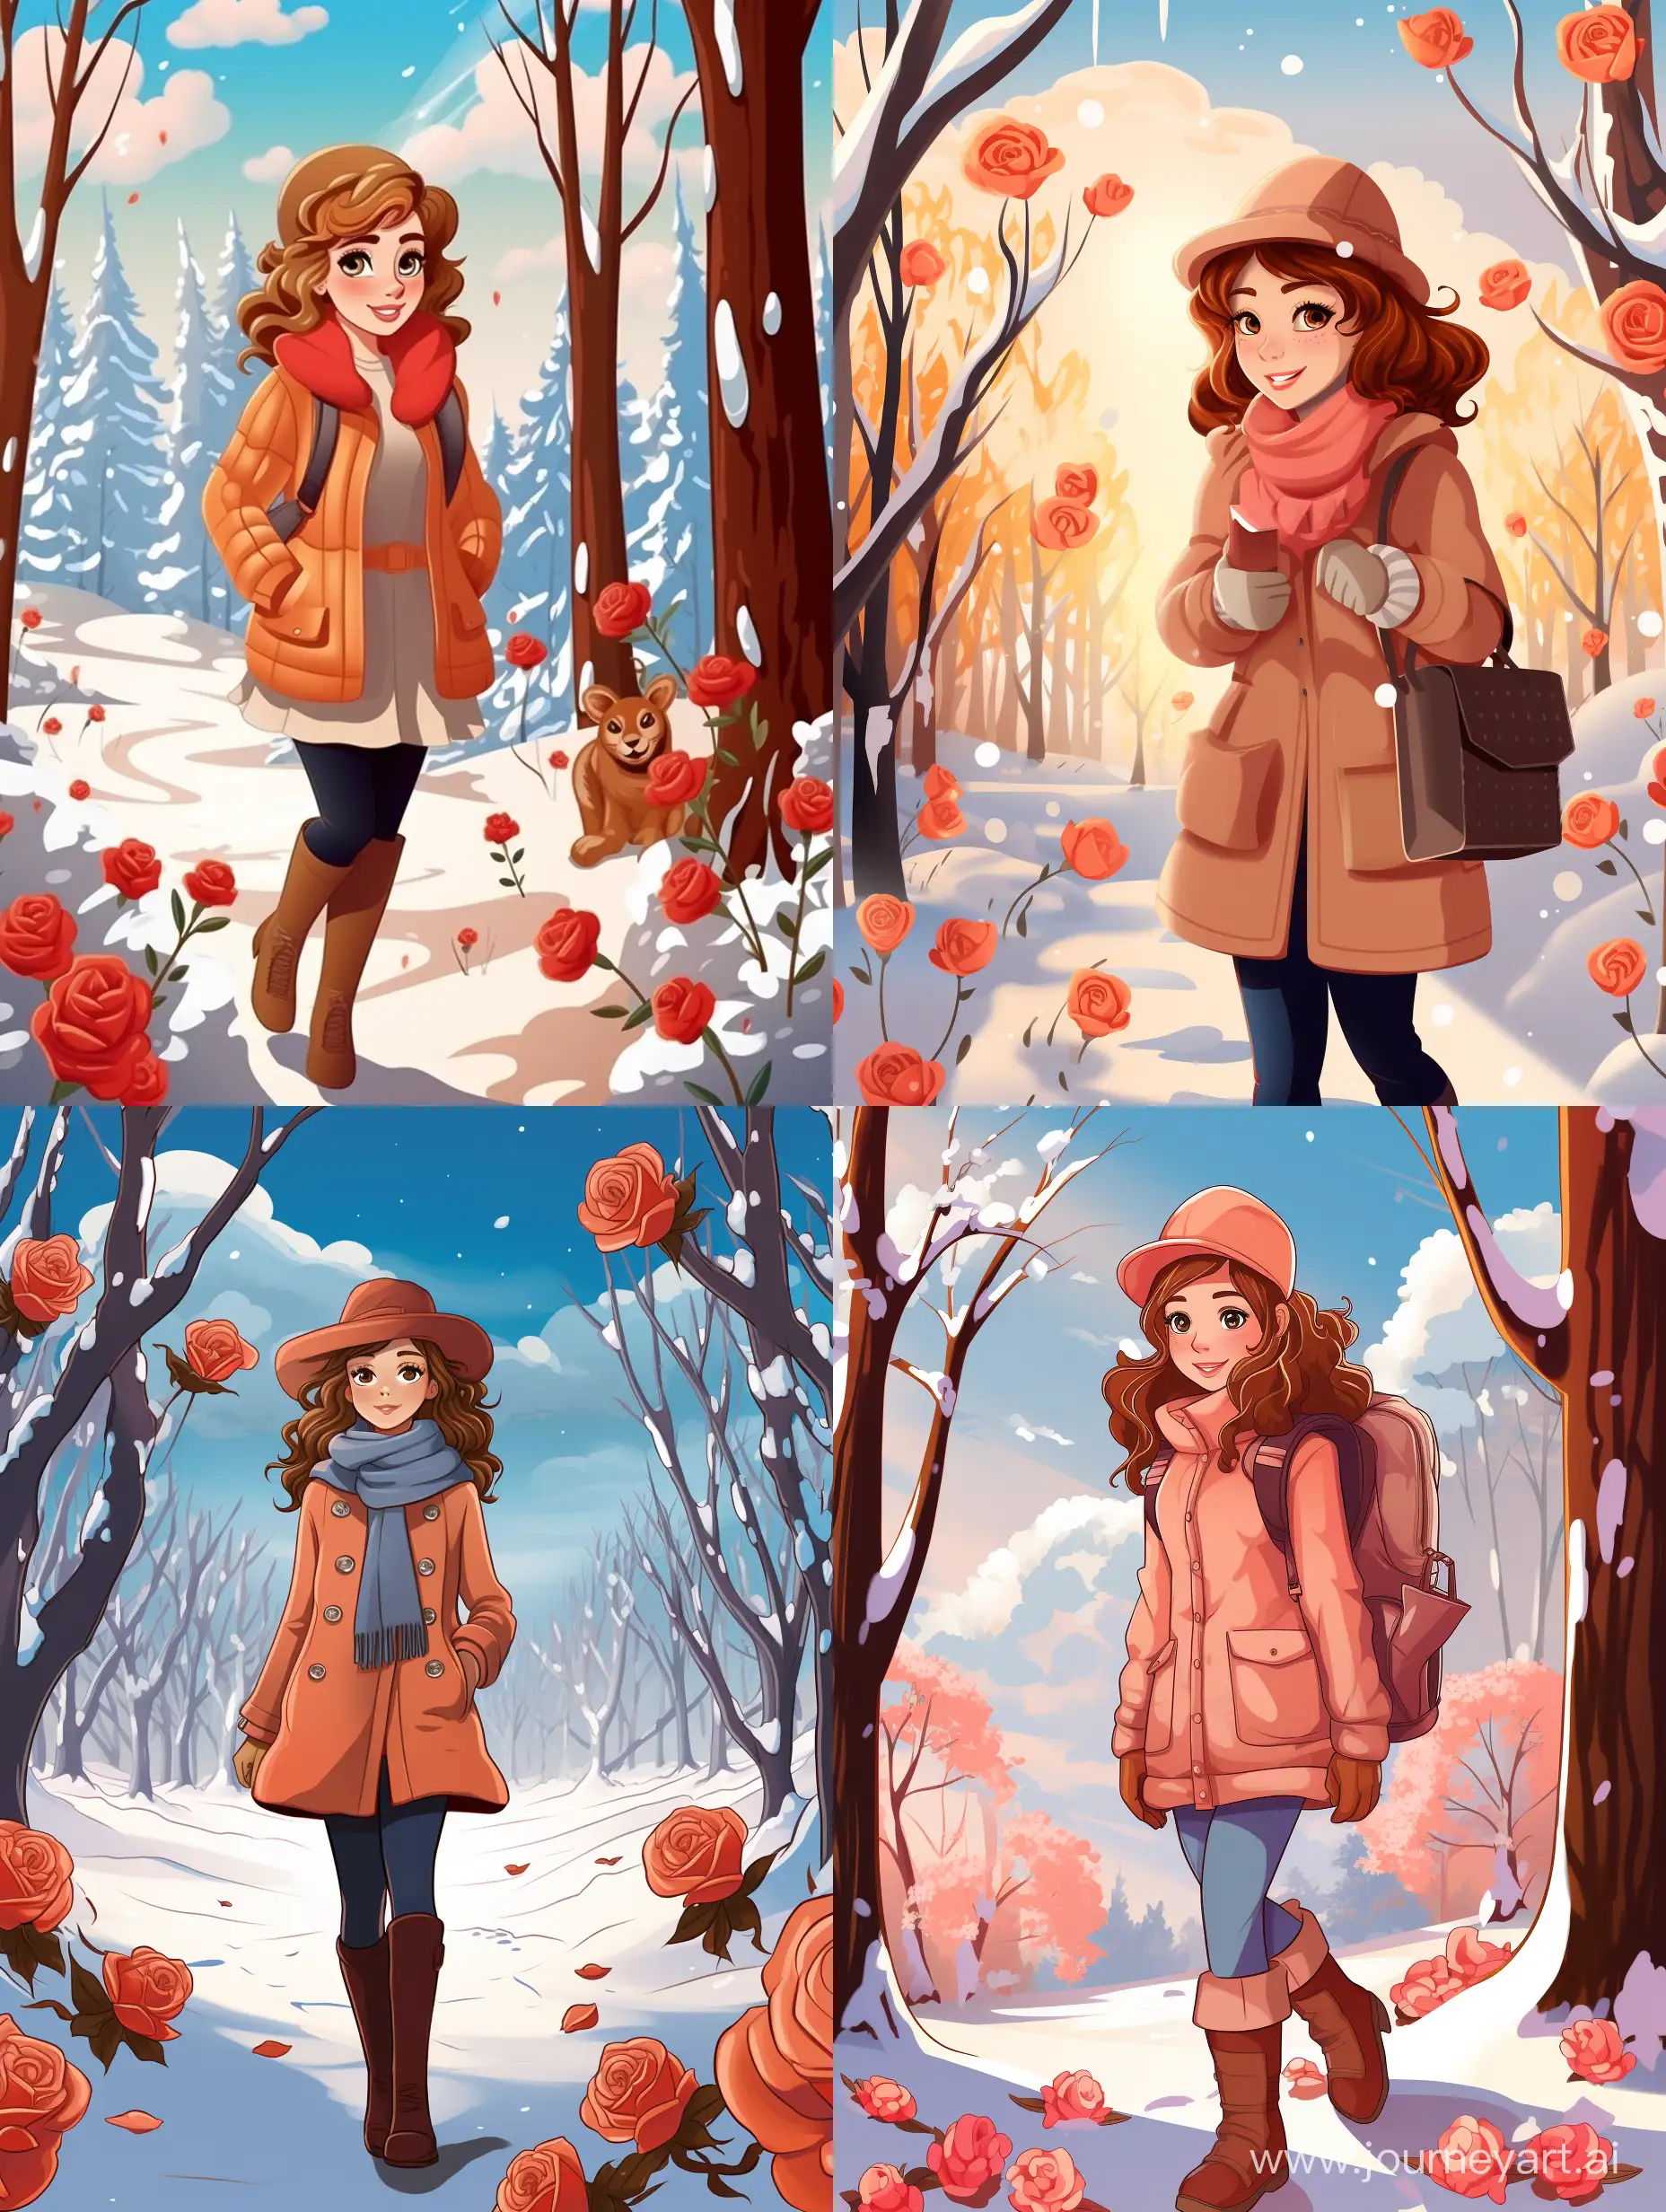 A beautiful girl is walking through a winter forest on a bright sunny day, and roses are blooming all around. Style: cartoon